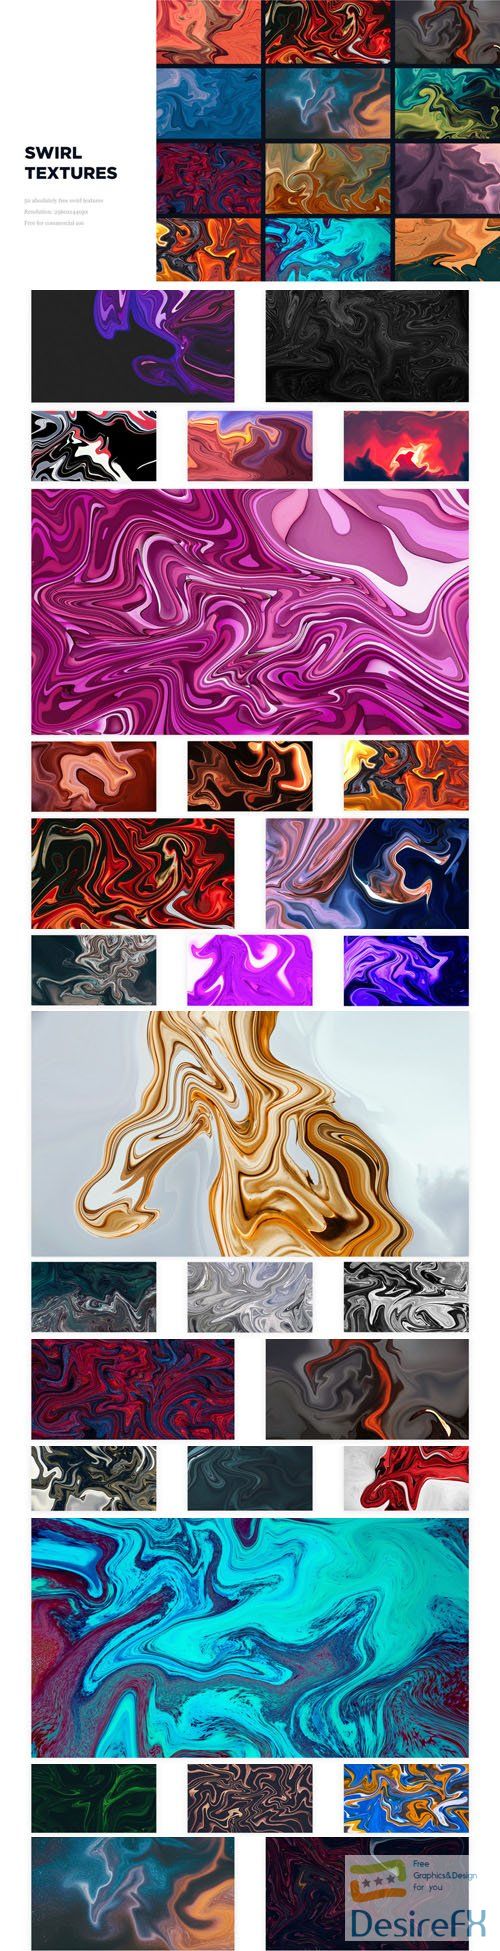 50 Swirl Textures Pack